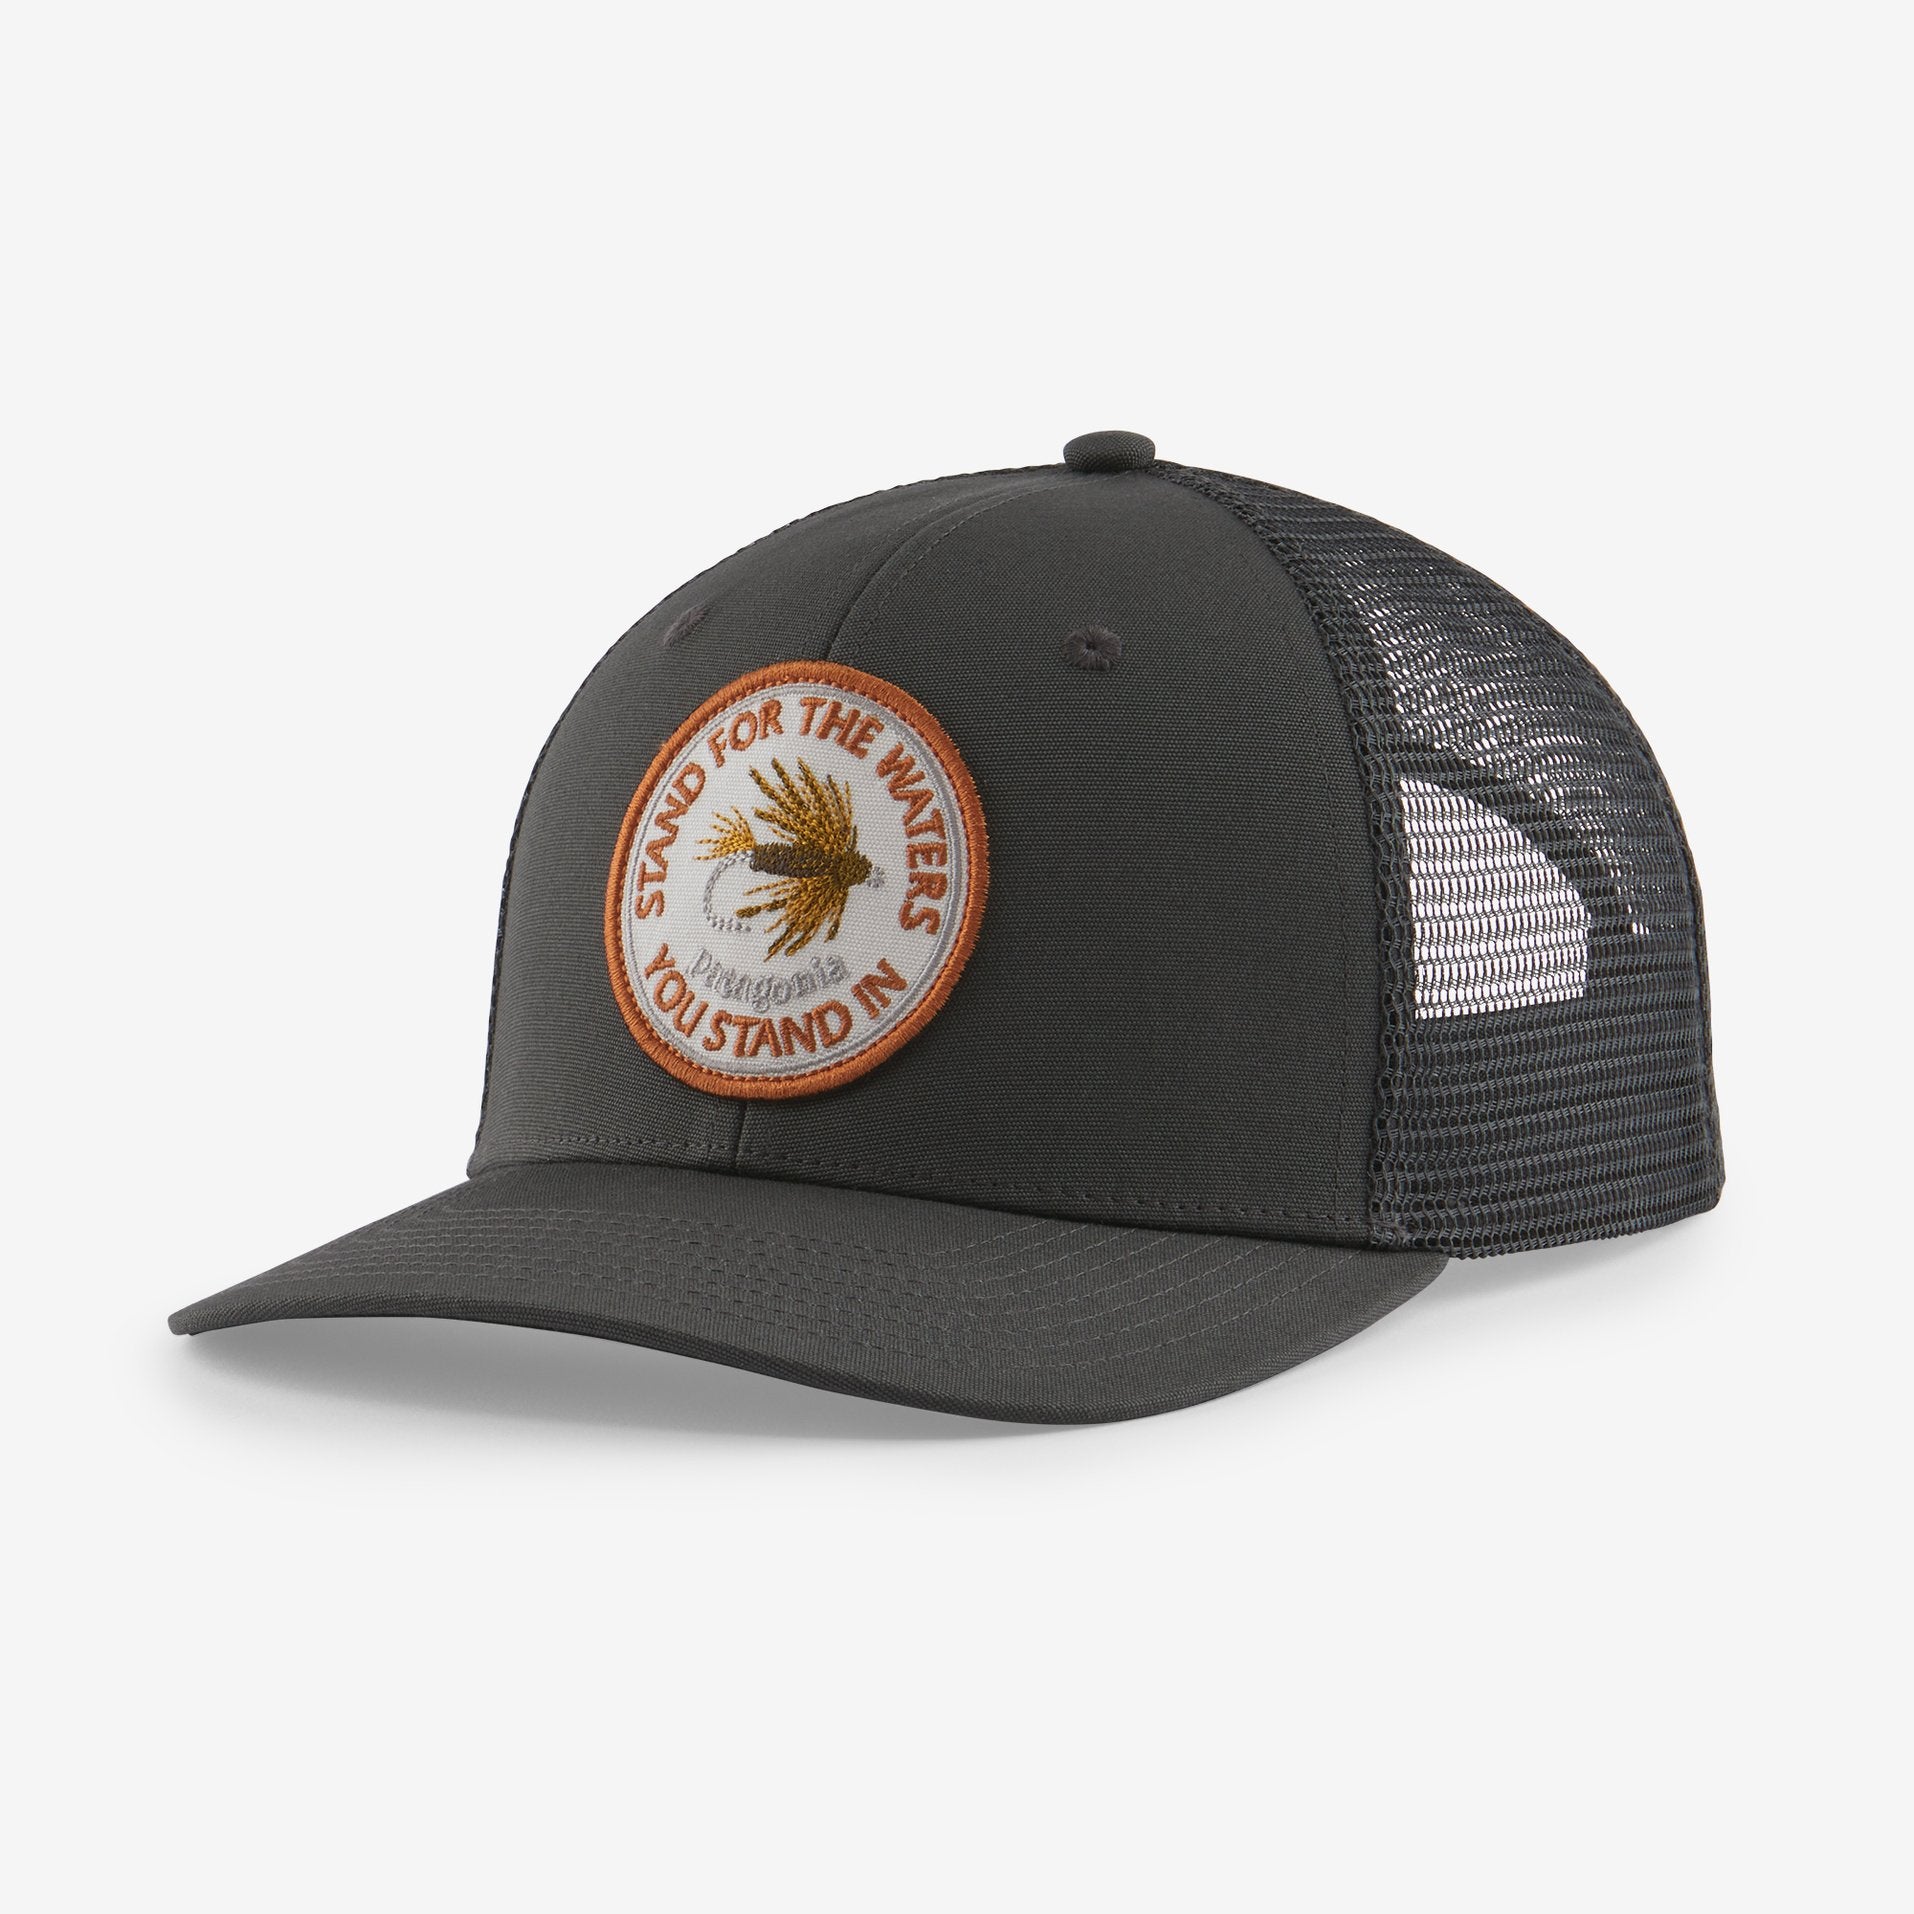 Patagonia Take a Stand Trucker Hat Forge Grey - Stand for the Waters